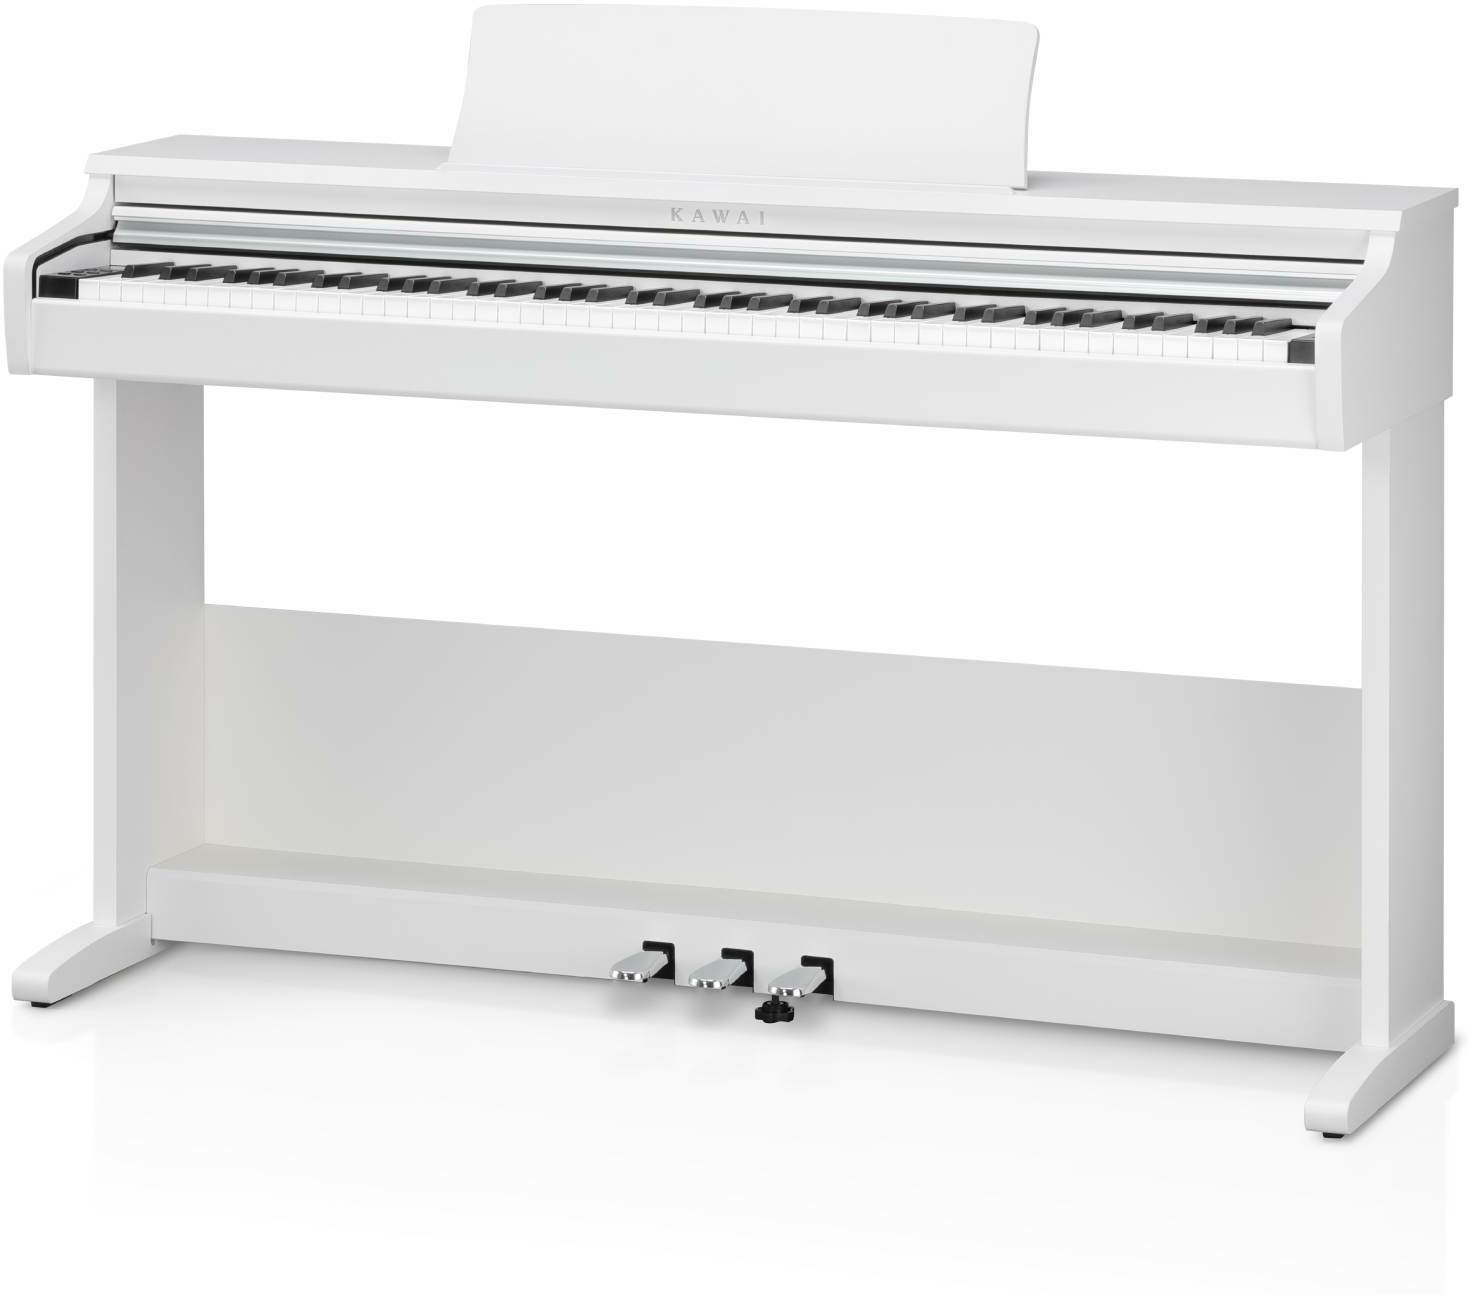 Kawai Kdp 75 Wh - Digital piano with stand - Main picture